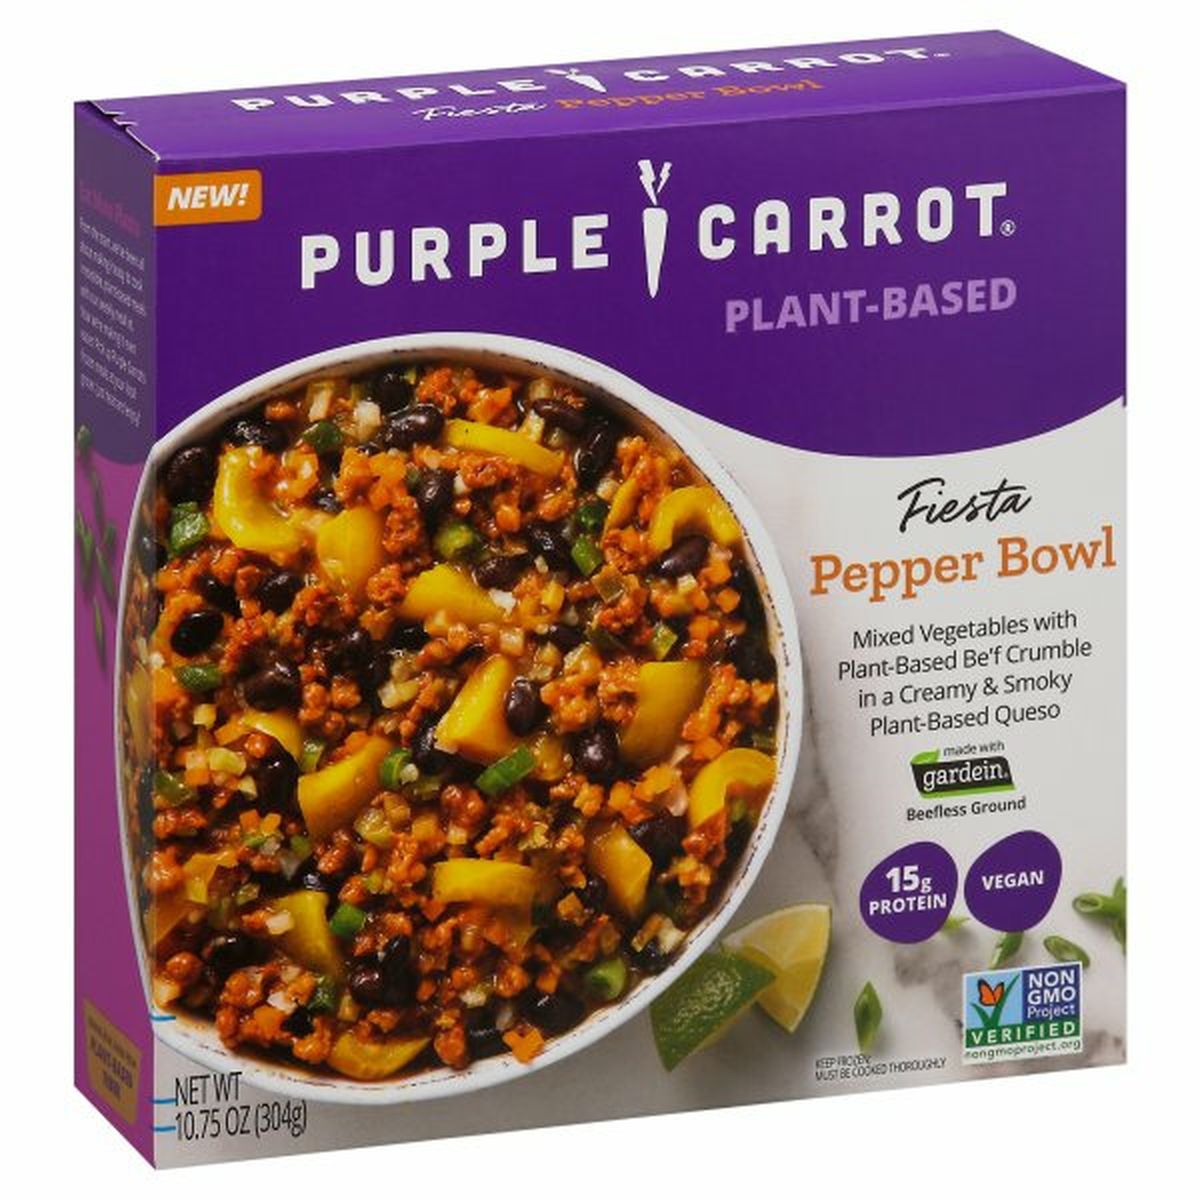 Calories in 0i Pepper Bowl, Fiesta, Plant-Based